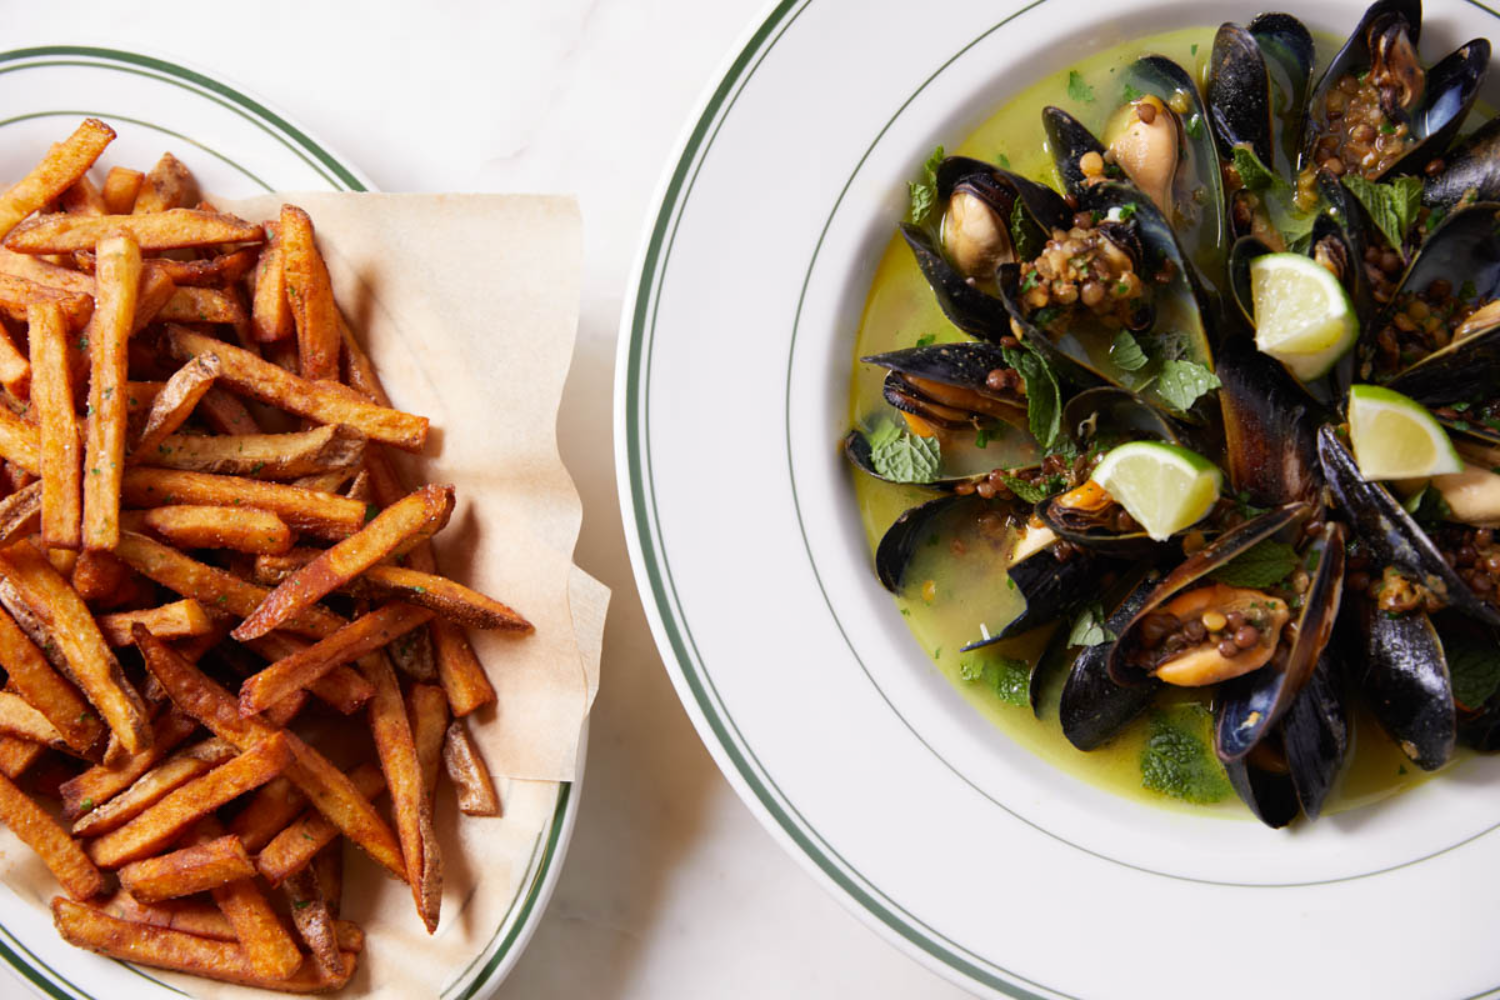 mussels on a plate, french fries on a plate